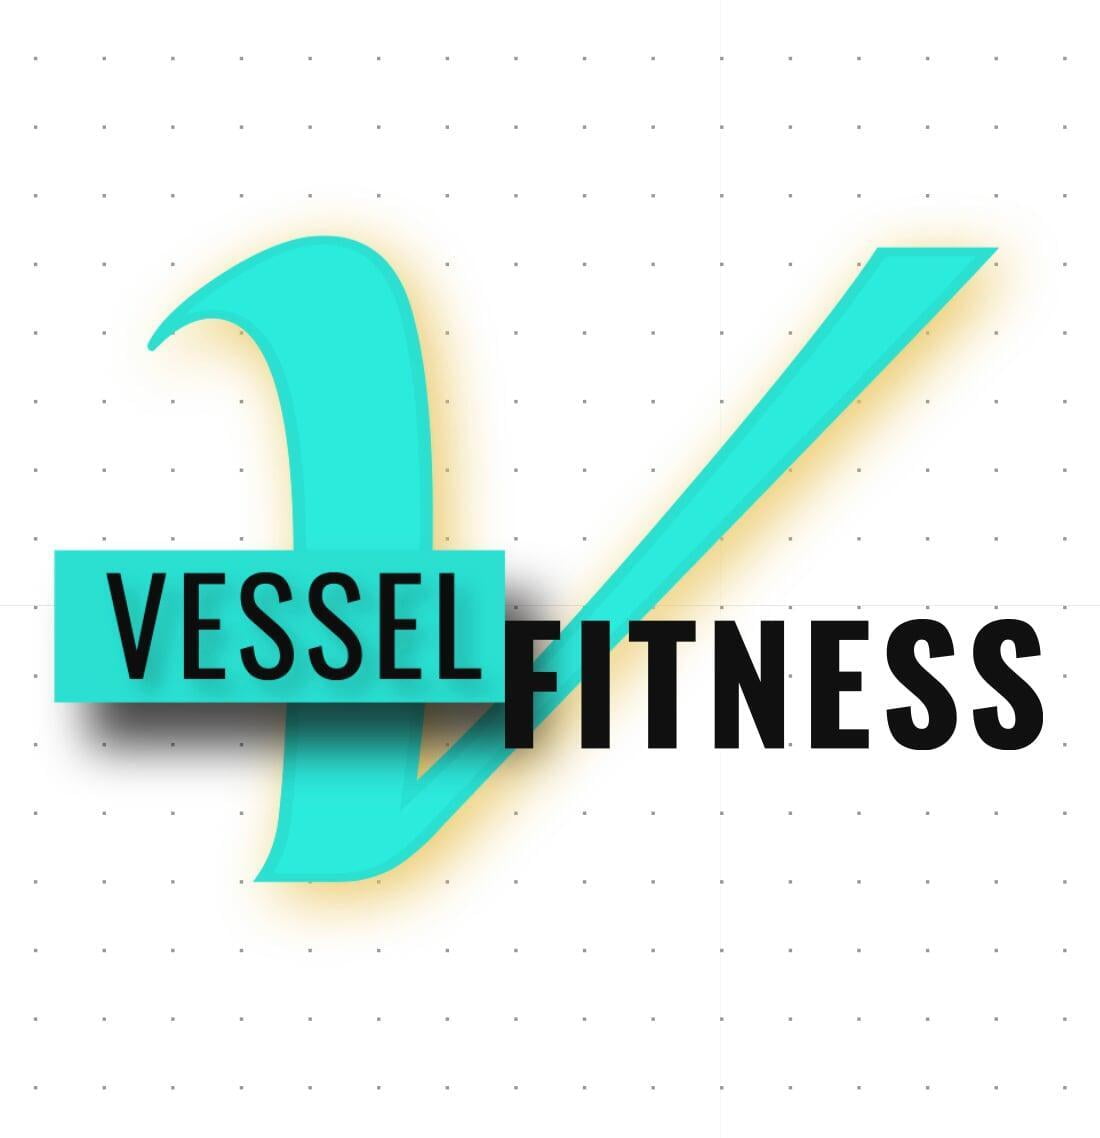 Vessel Fitness by Cath